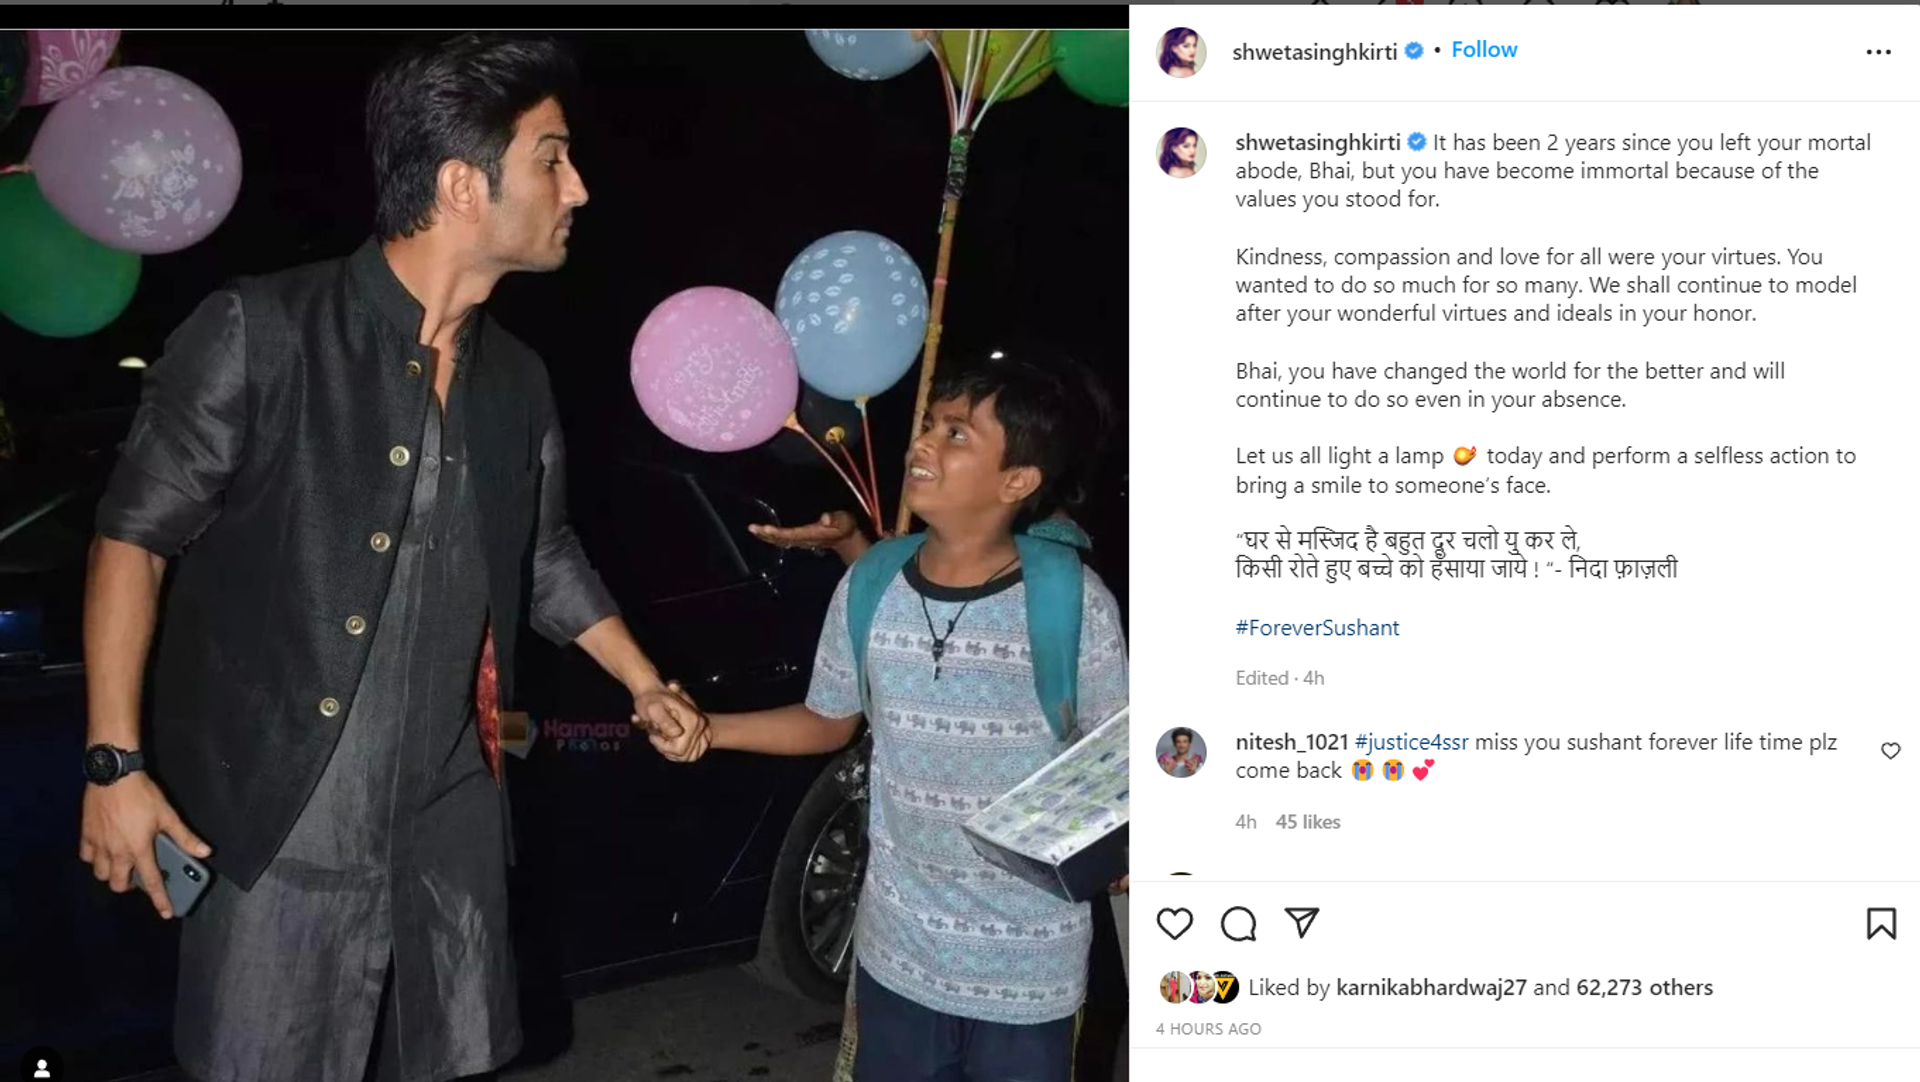 Late Bollywood actor Sushant Singh Rajput's sister Shweta Singh Kirti shared a heartfelt note on his brother's 2nd death anniversary  - Sputnik International, 1920, 14.06.2022